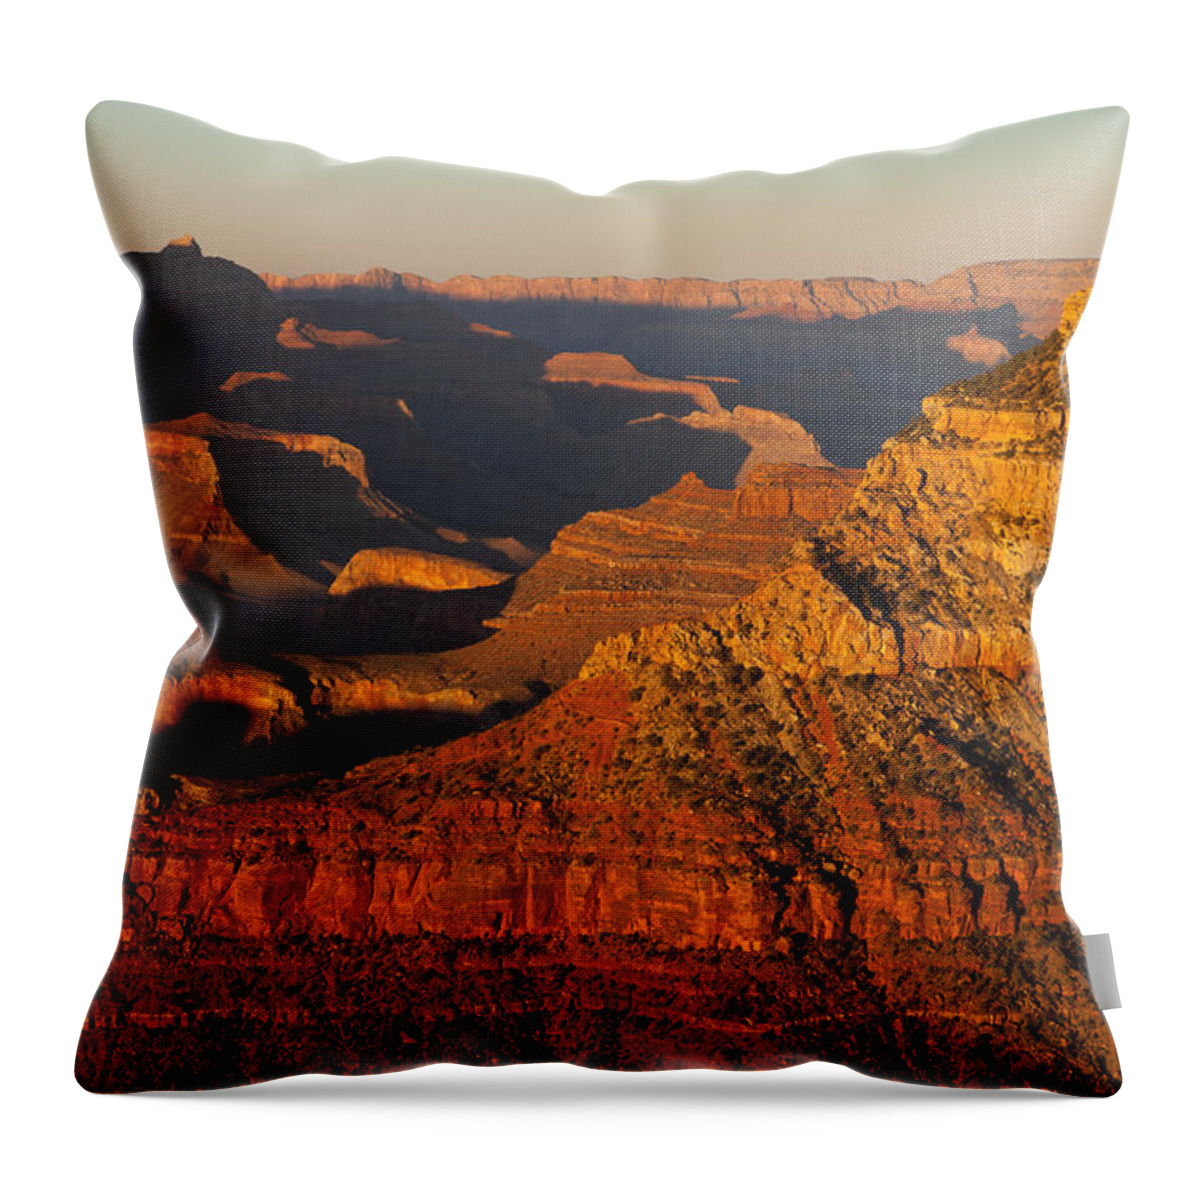 Grand Canyon National Park Throw Pillow featuring the photograph Grand Canyon 149 by Michael Fryd